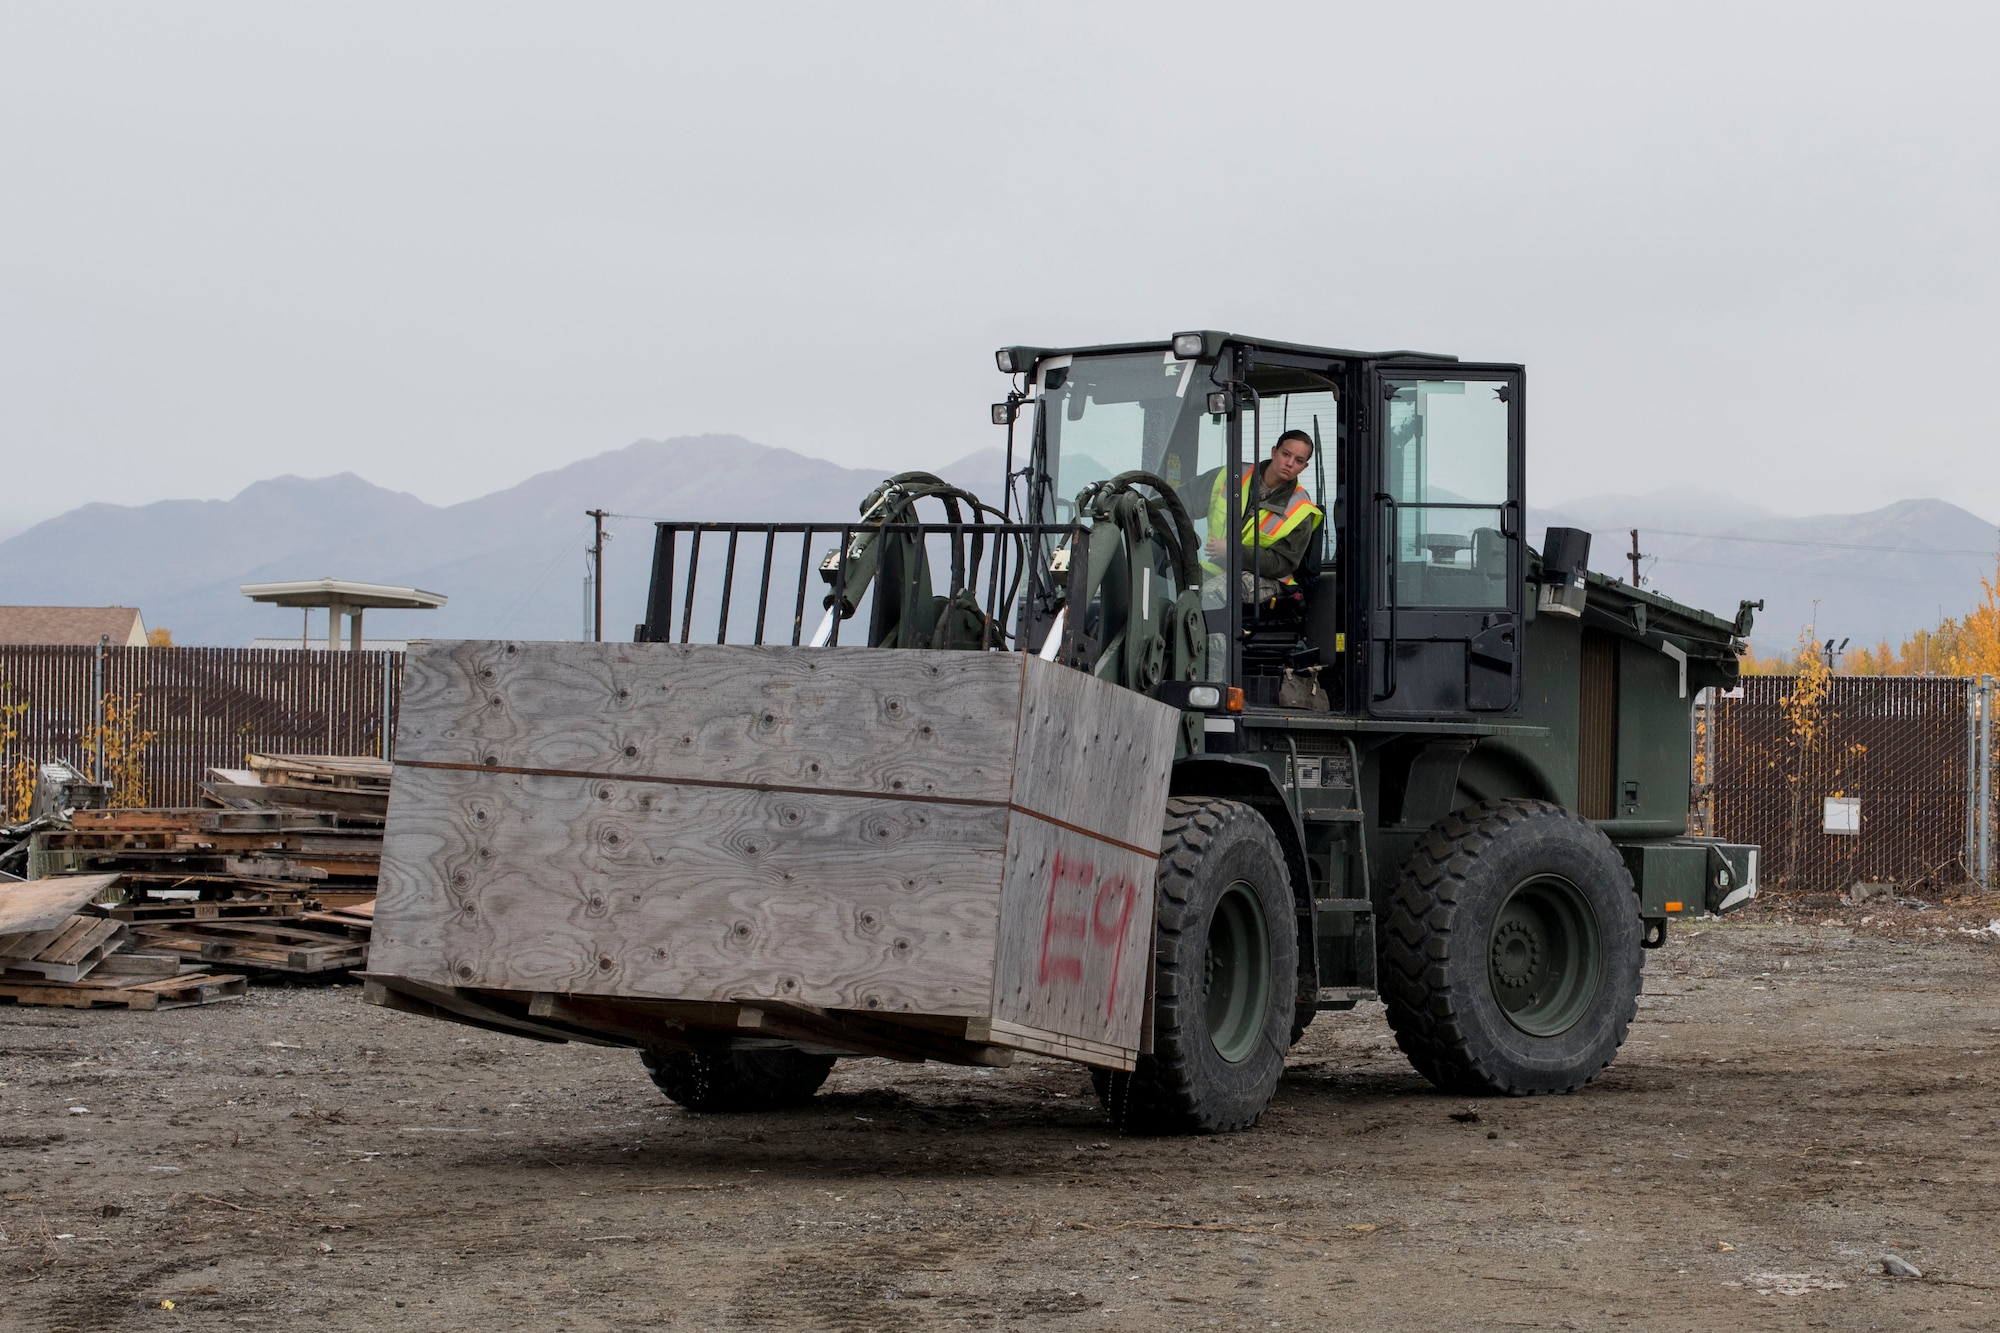 U.S. Air Force Airman 1st Class Pamela Proteau, a 773d Logistics Readiness Squadron vehicle operator, picks up a crate using a 10k all-terrain forklift to remove wreckage debris at Joint Base Elmendorf-Richardson, Alaska, Sept. 27, 2018. Proteau was part of a large wreckage disposal team whose mission was to remove debris from the fatal crash of the Sitka 43 C-17 Globemaster III that had been stored at JBER since 2010. After multiple shipments, the ‘Sitka 43’ wreckage is finding a new purpose at the Air Force Safety Center (AFSEC) Crash Lab at Kirtland Air Force Base, N.M.